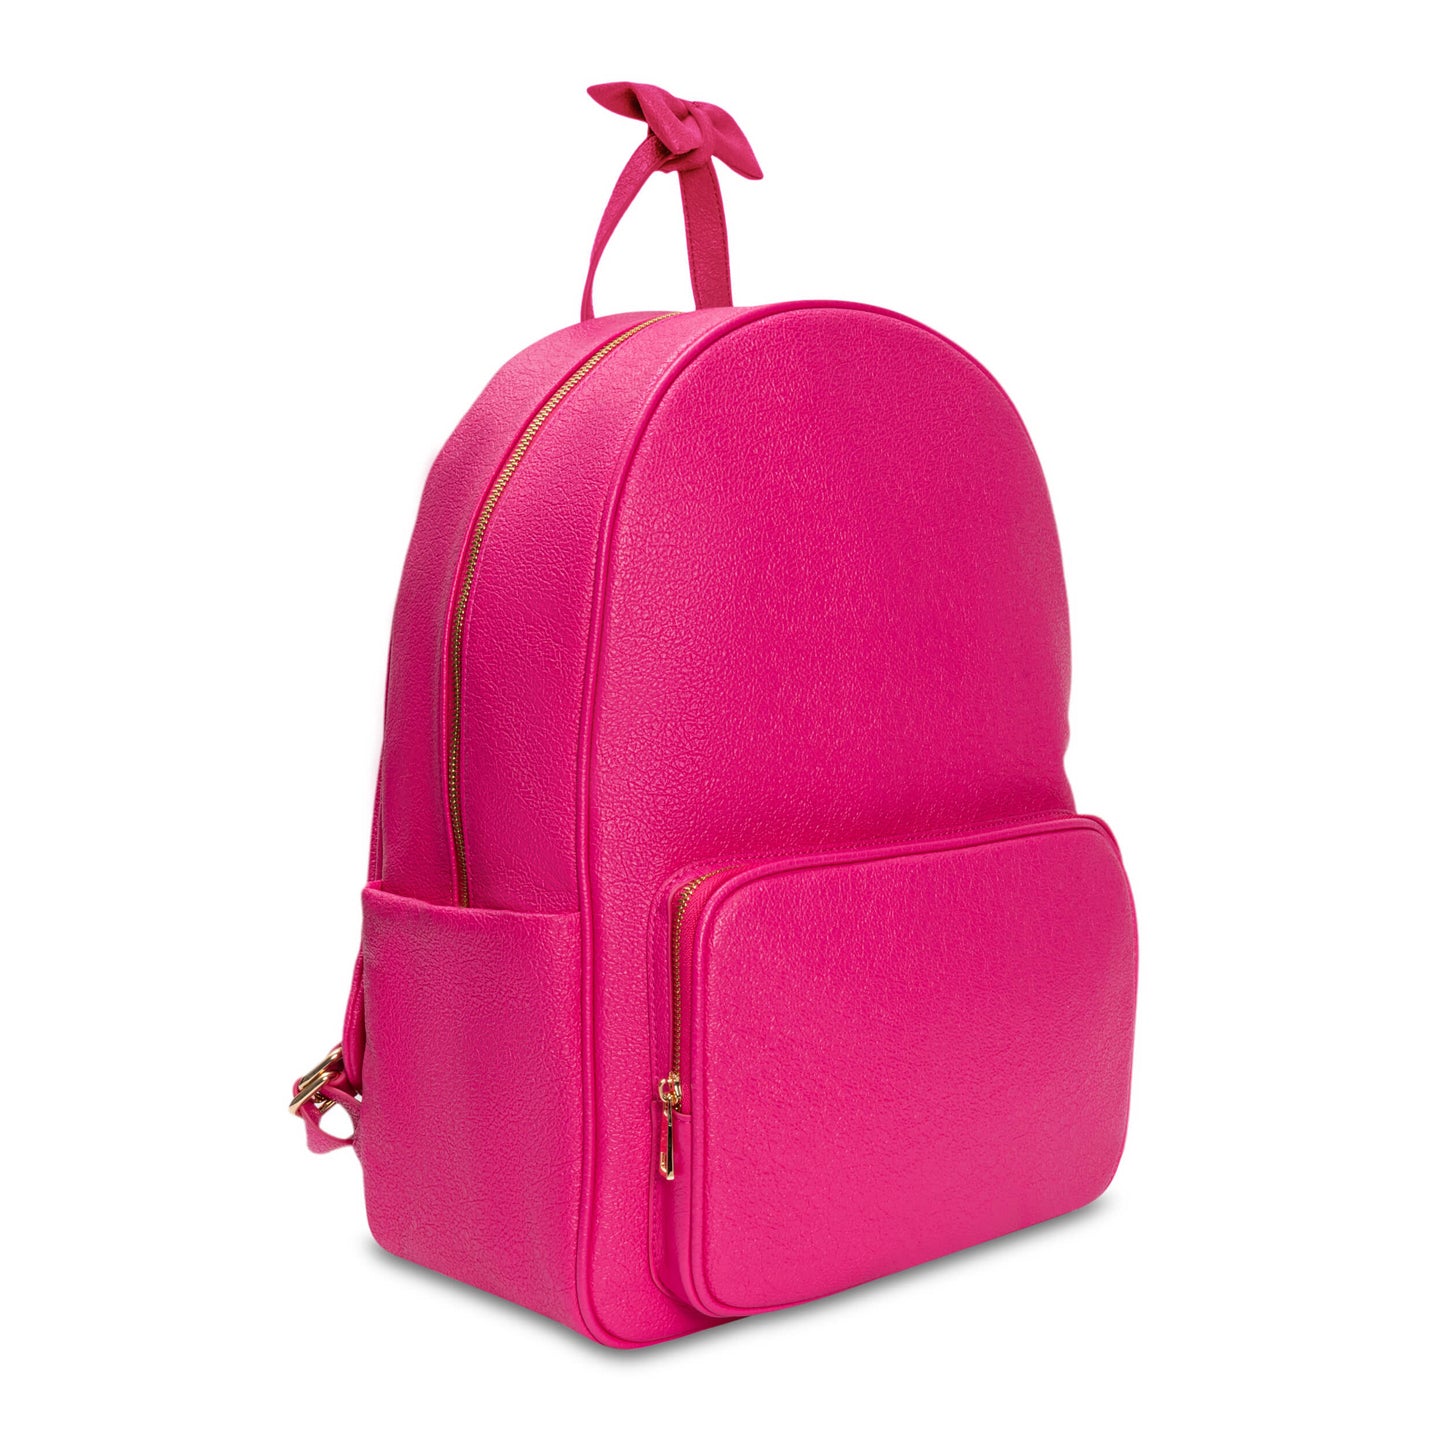 The Taly Backpack - Brave Pink (Customizable)